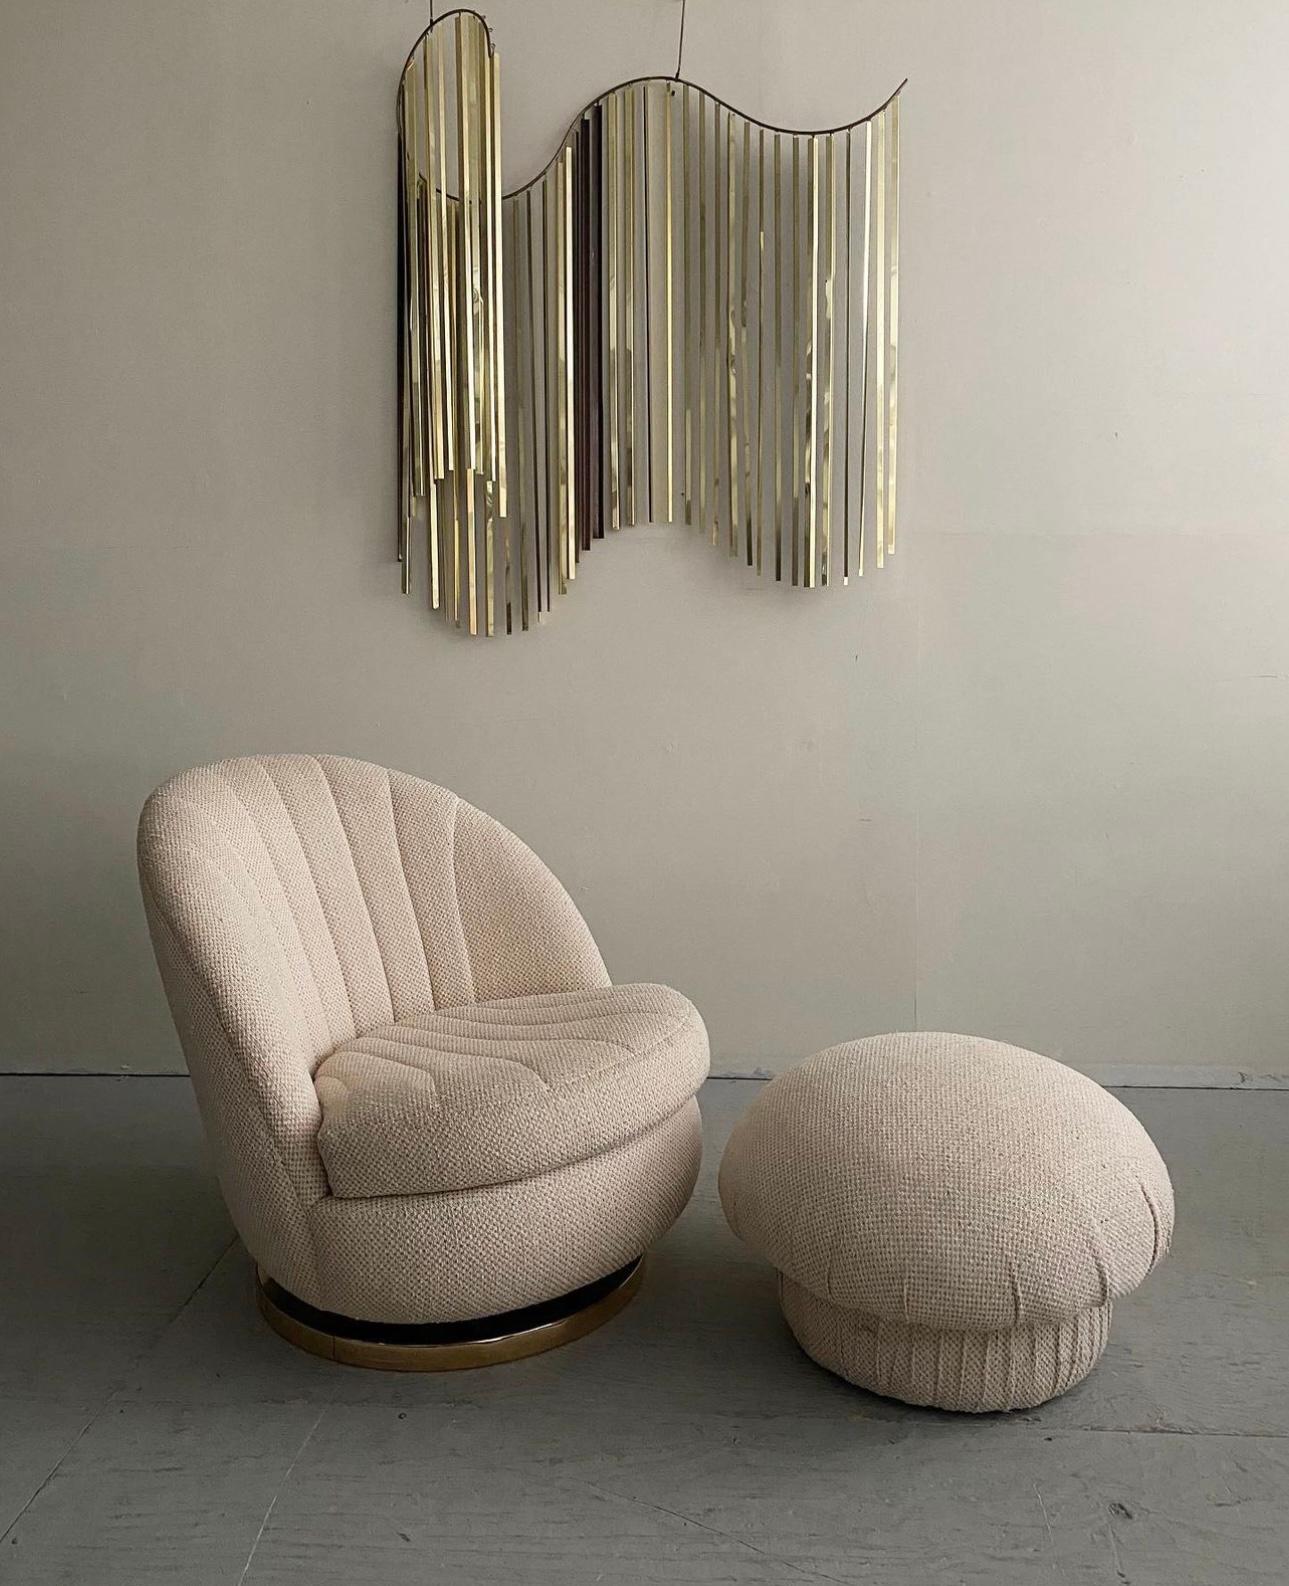 Mid-Century Modern Shellback Lounge Chair And Ottoman Designed By Milo Baughman for Thayer Coggin, Circa 1960s. This unique lounge chair and ottoman feature original off-white textured upholstery. Sits on a solid brass base that allows for a